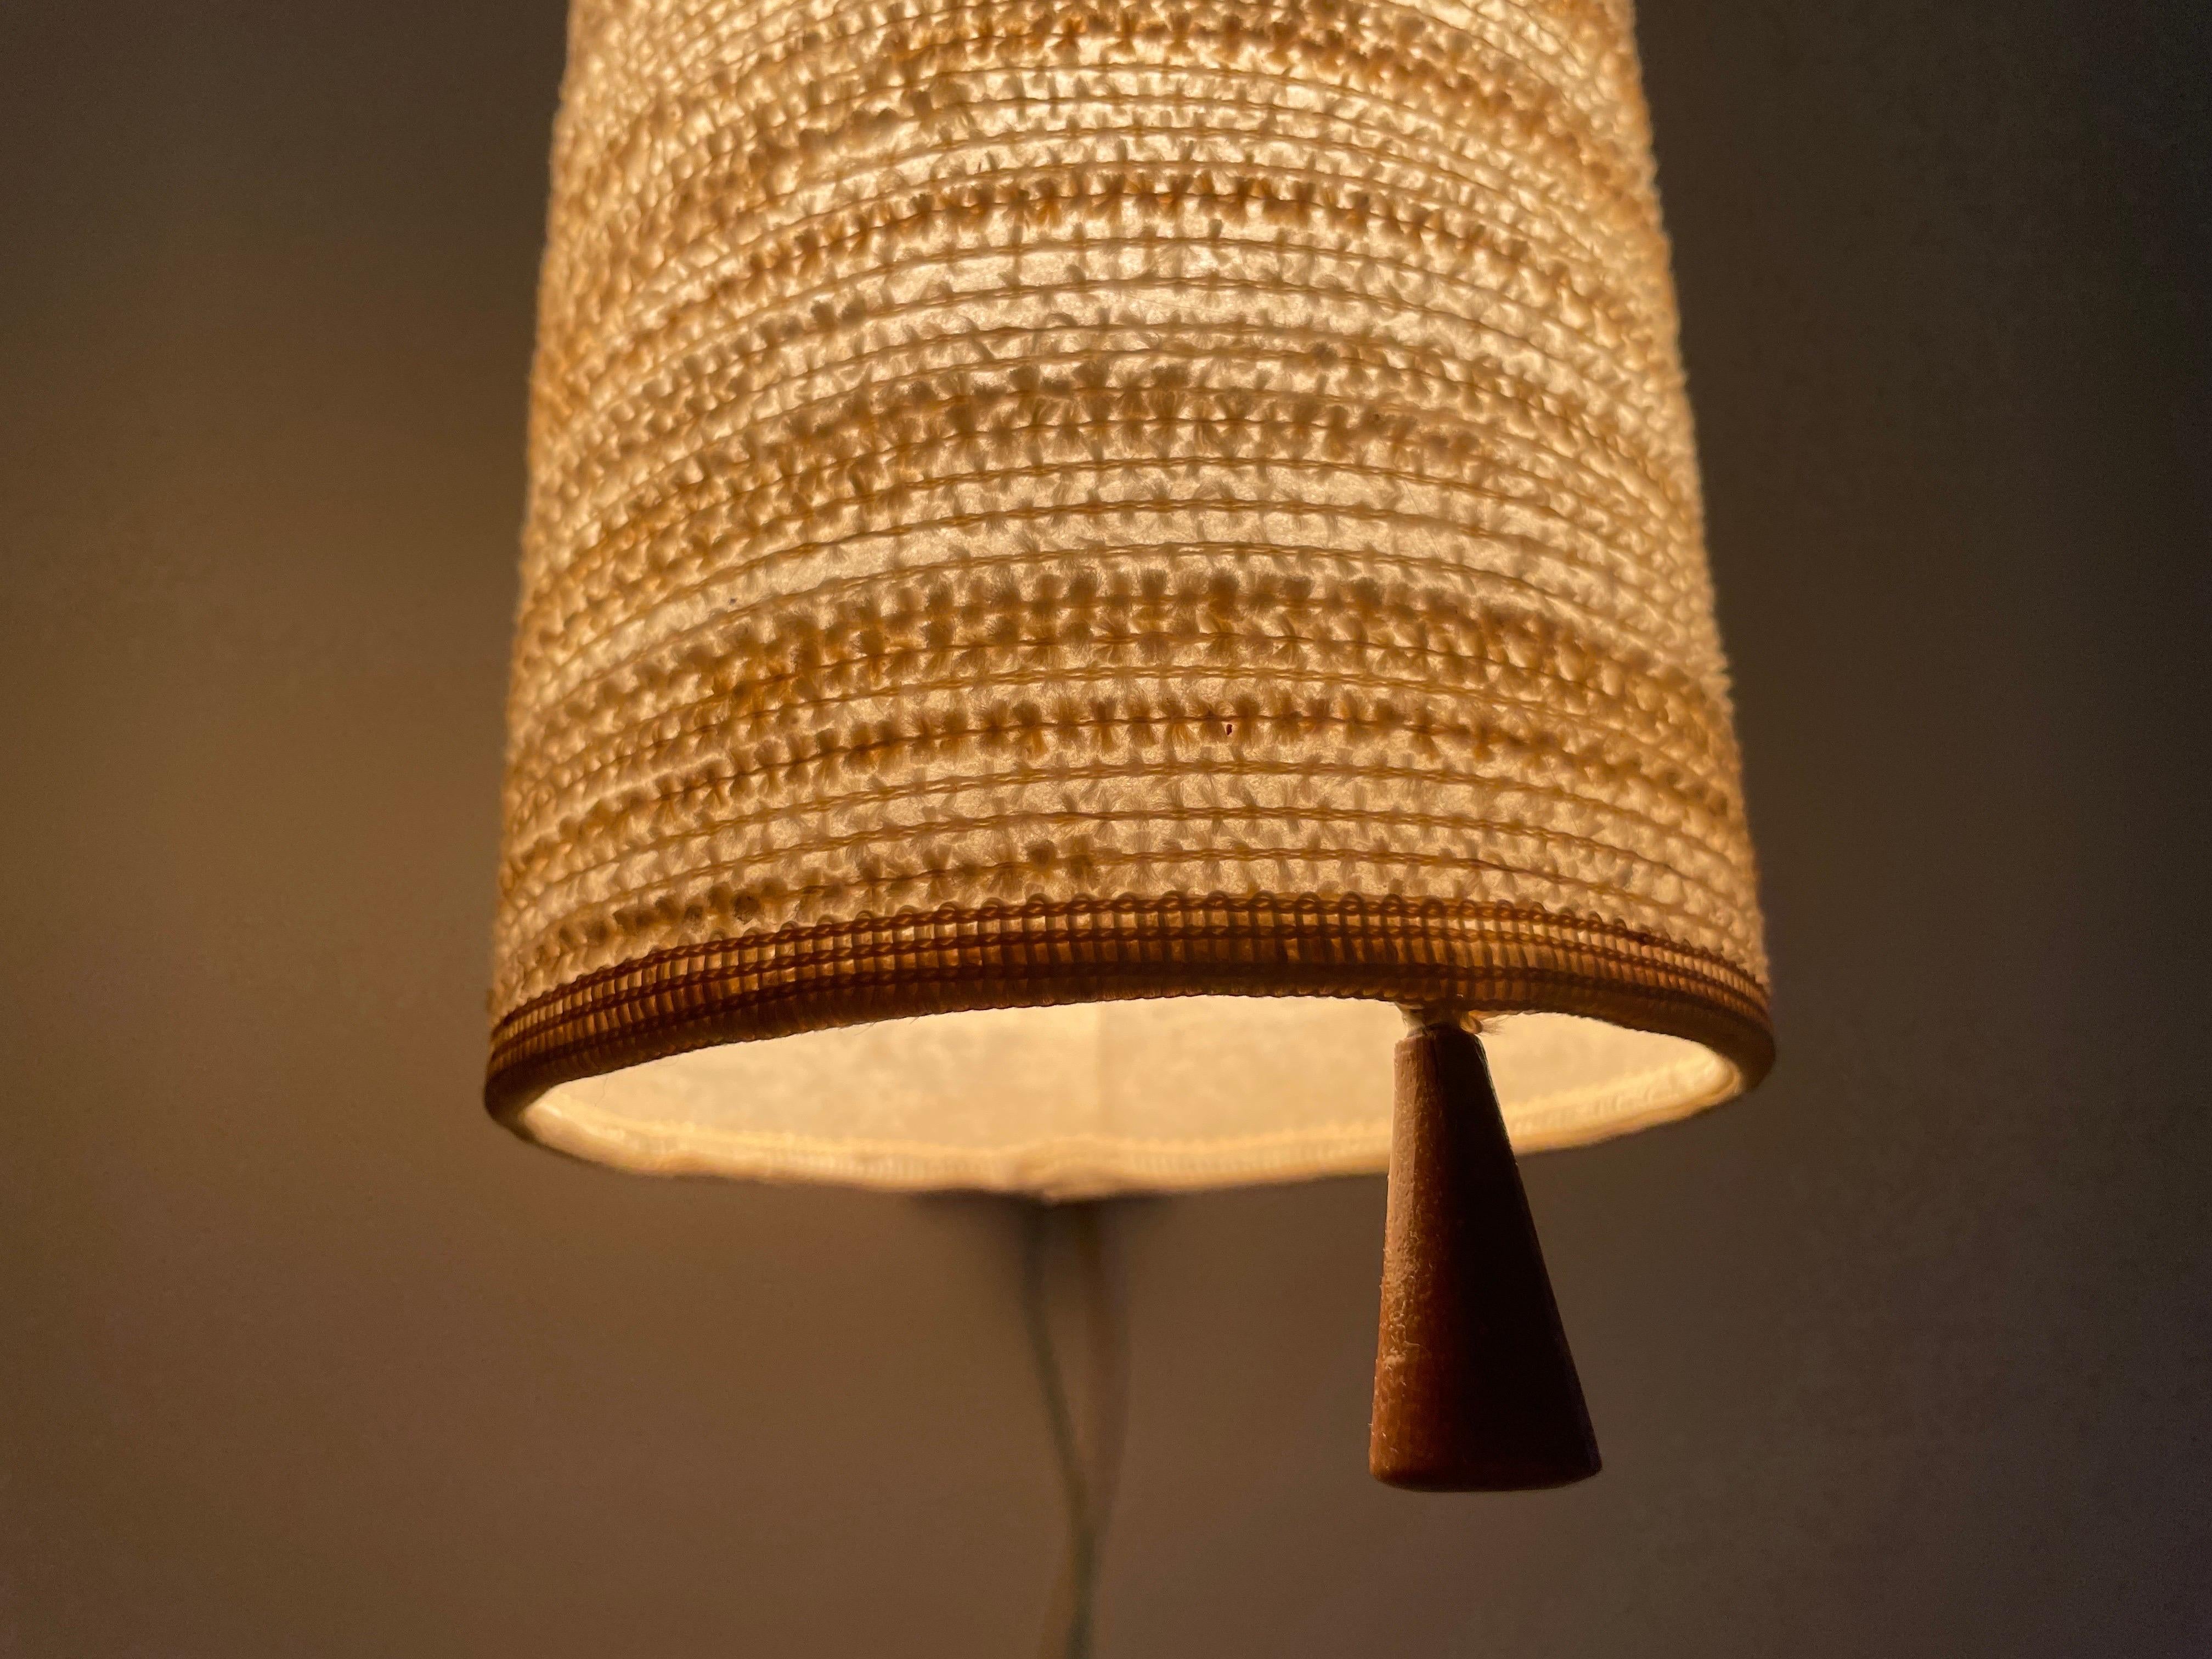 Fabric Shade and Wood Wall Lamp with Brass Neck, 1960s, Germany For Sale 9